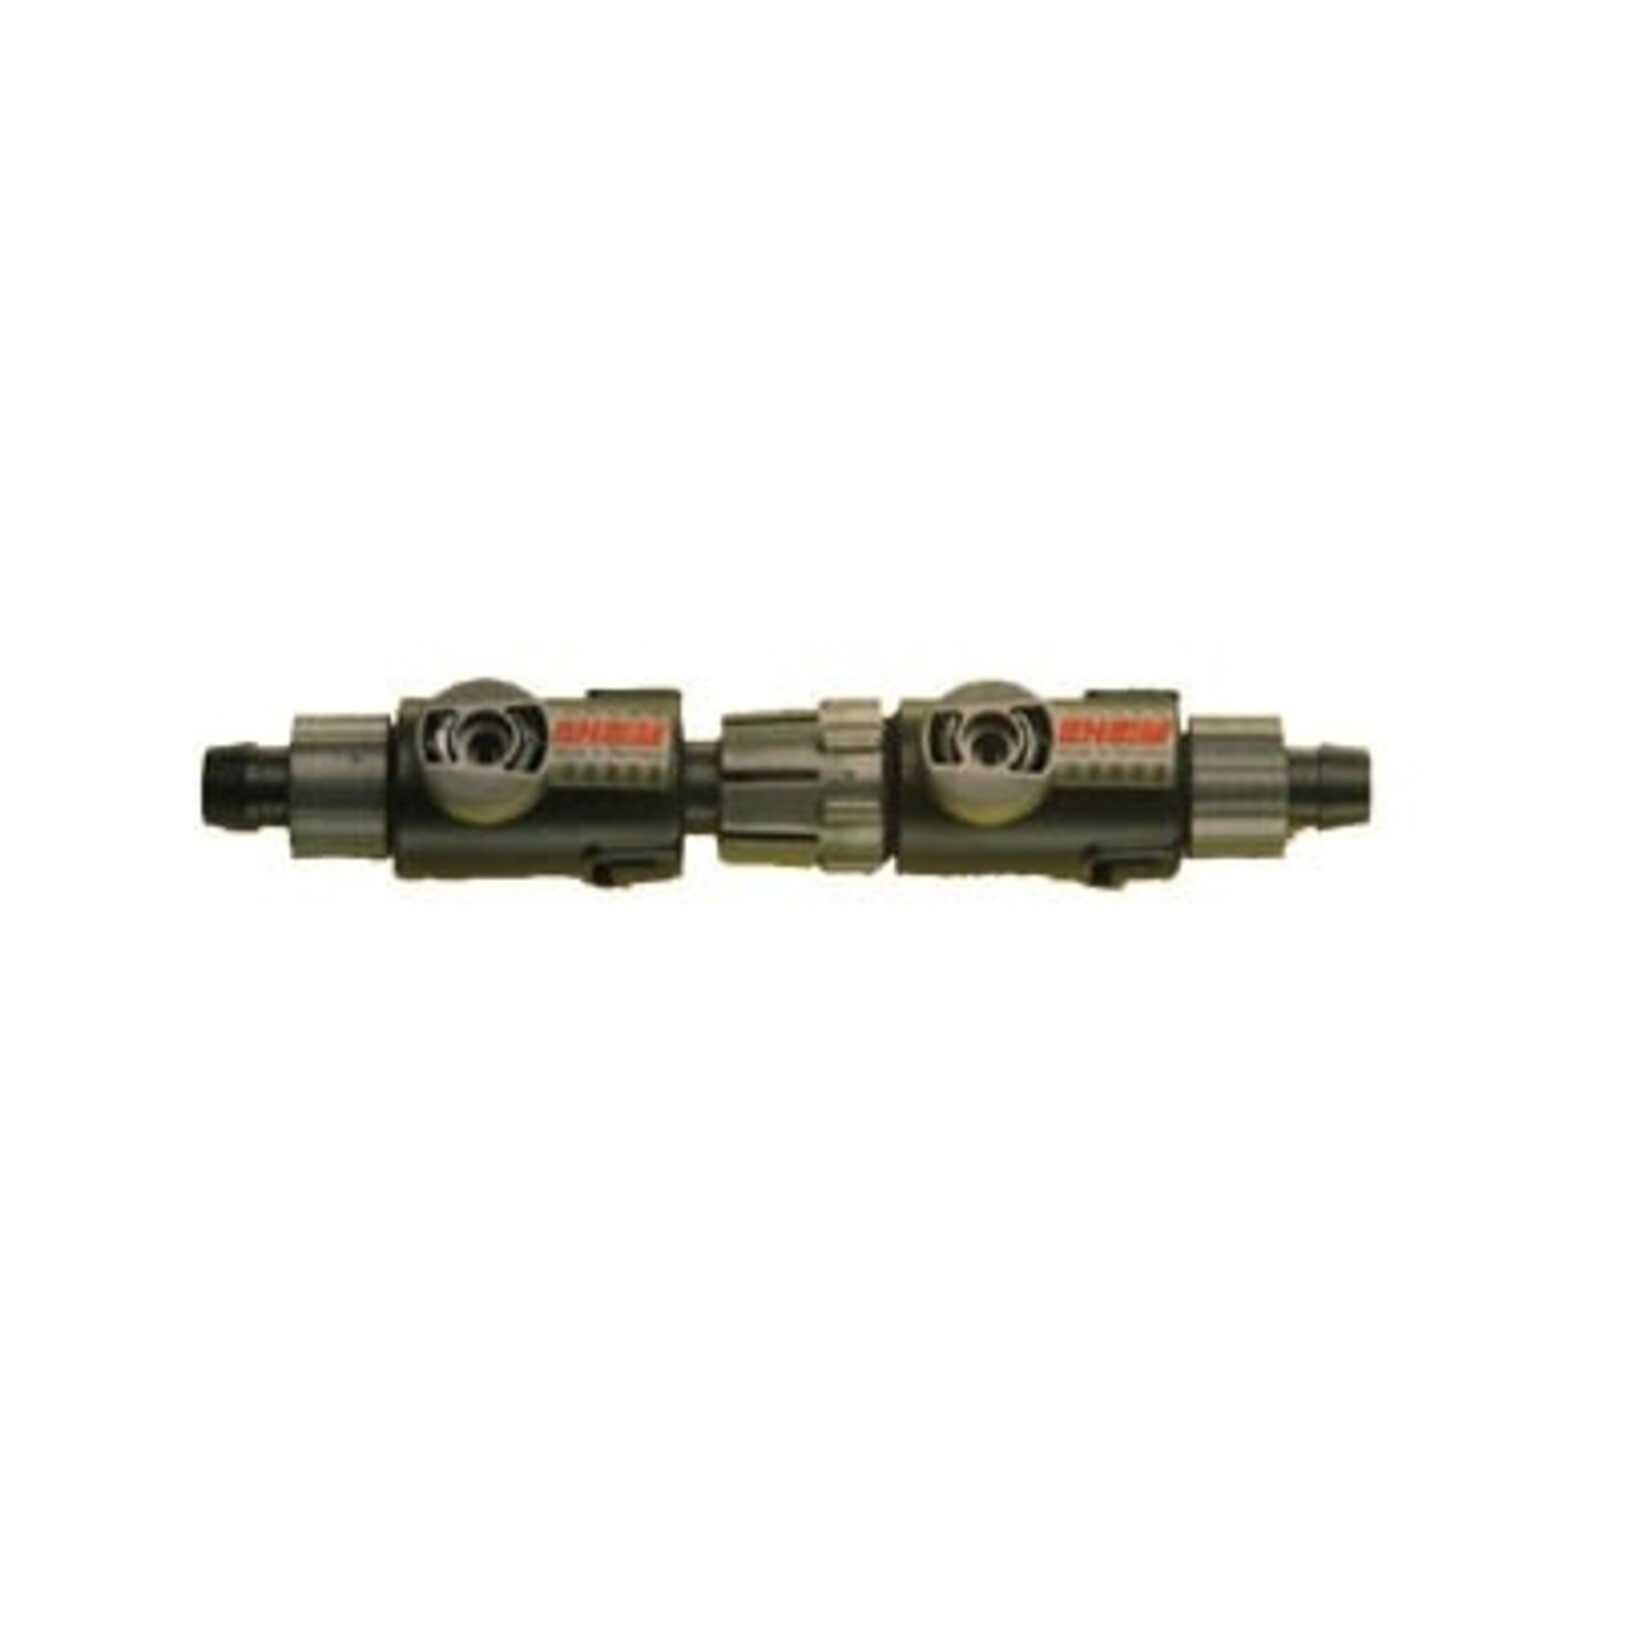 Eheim 2 taps with quick coupling for hose 19-27